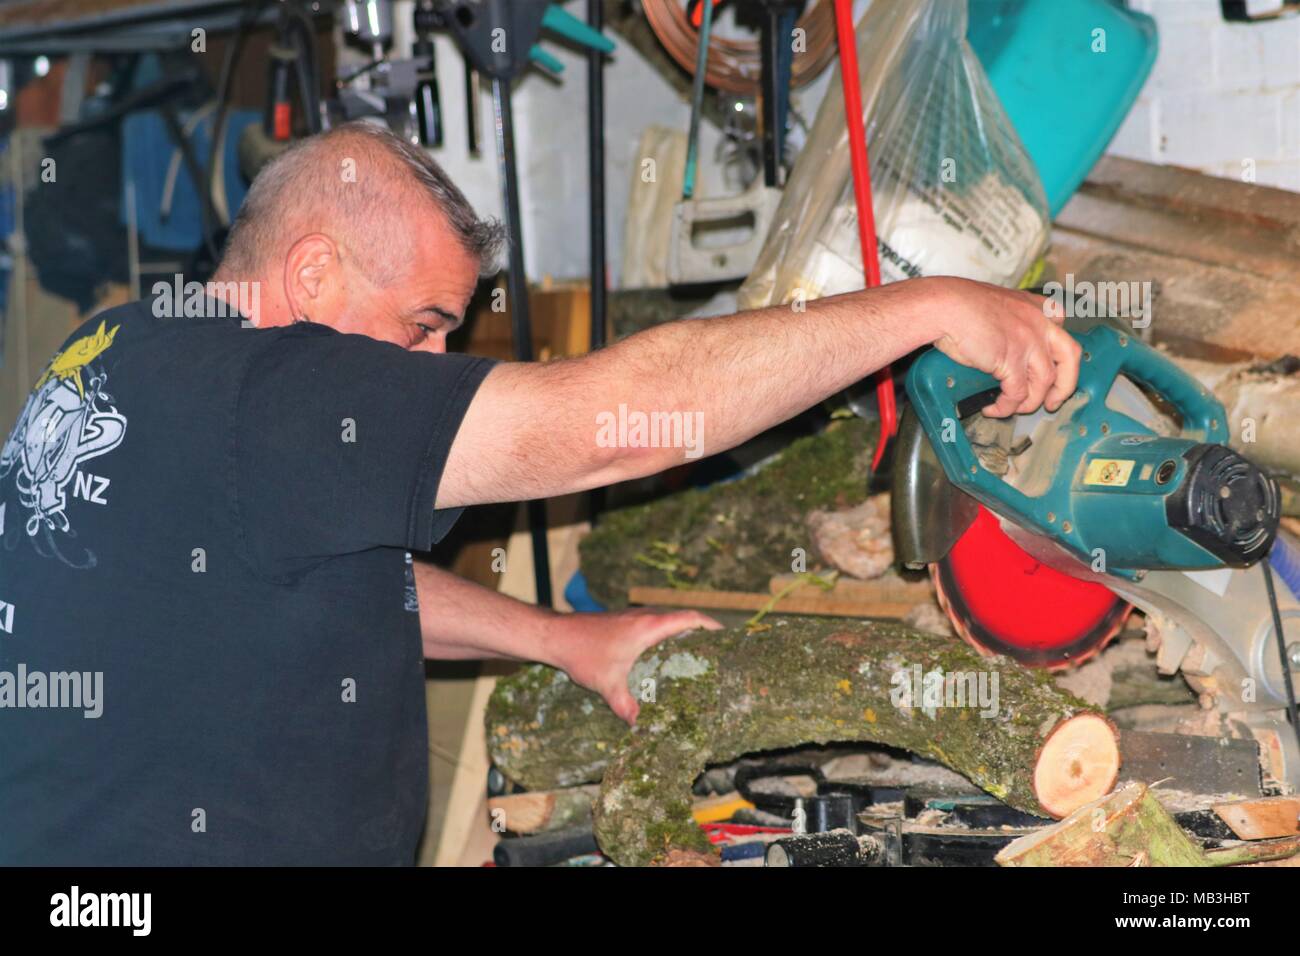 Middle aged man cutting up a log using a mitre saw / chop saw in a cluttered garage and not wearing any safety equipment Stock Photo